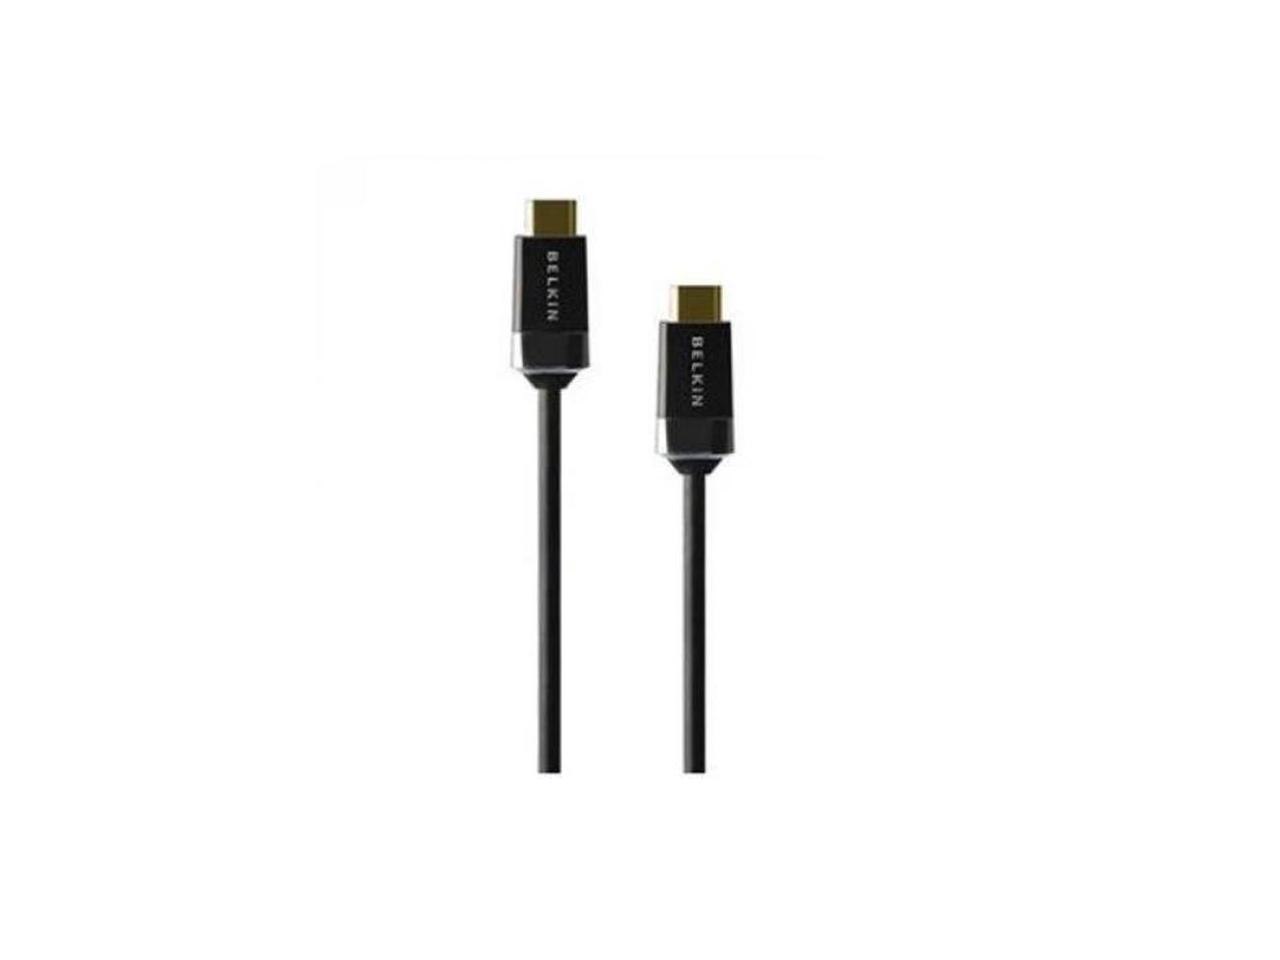 Belkin High Speed HDMI Audio/Video Cable with Ethernet